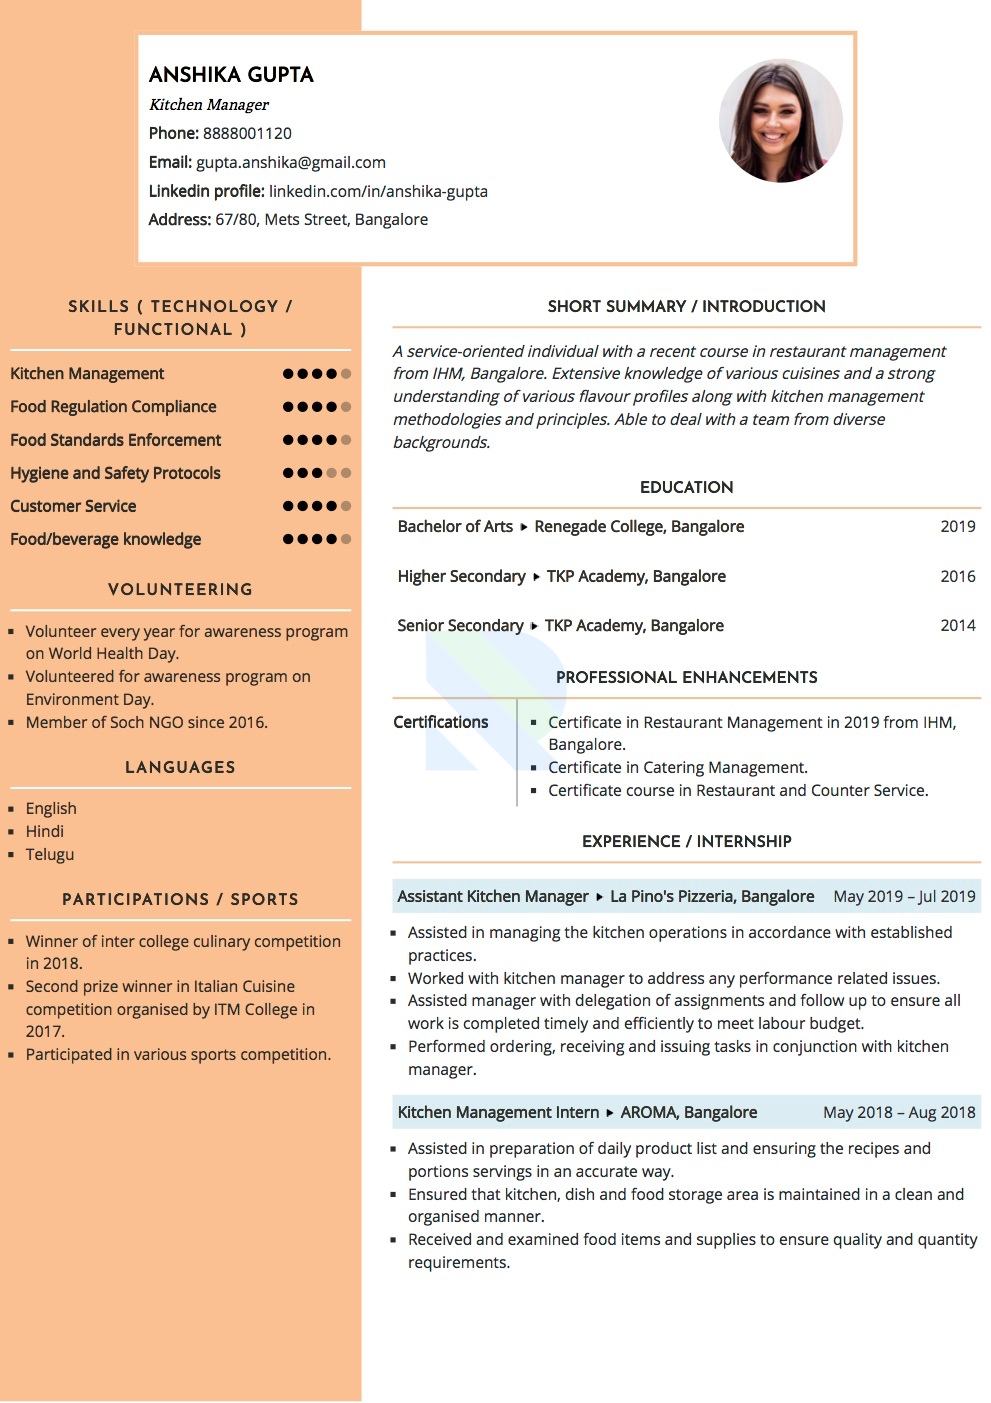 Sample Resume of Kitchen Manager | Free Resume Templates & Samples on Resumod.co